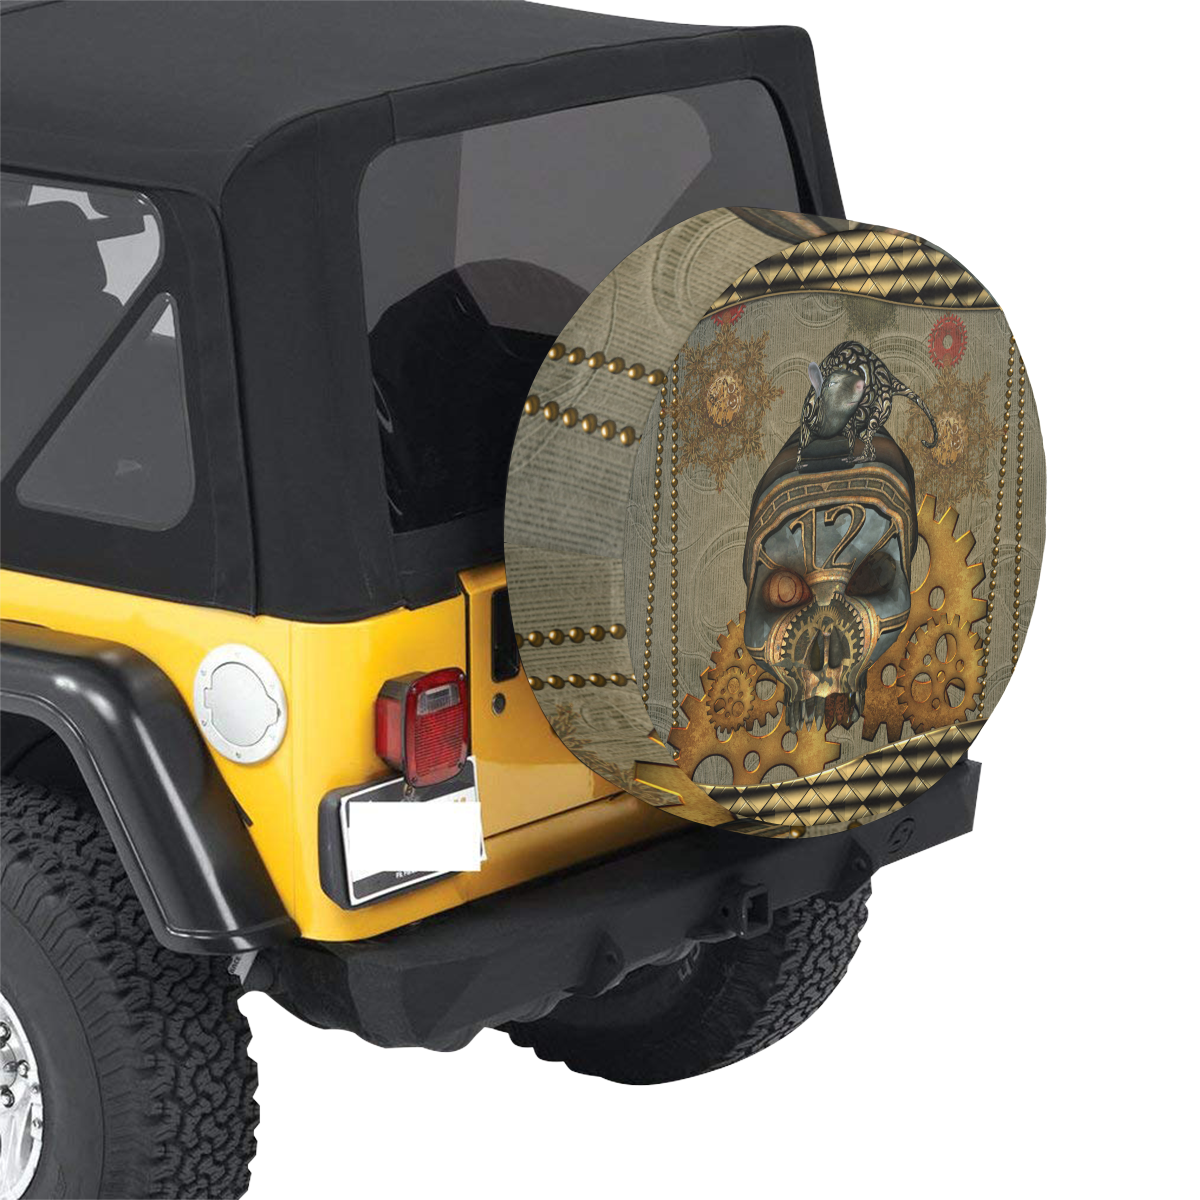 Awesome steampunk skull 32 Inch Spare Tire Cover